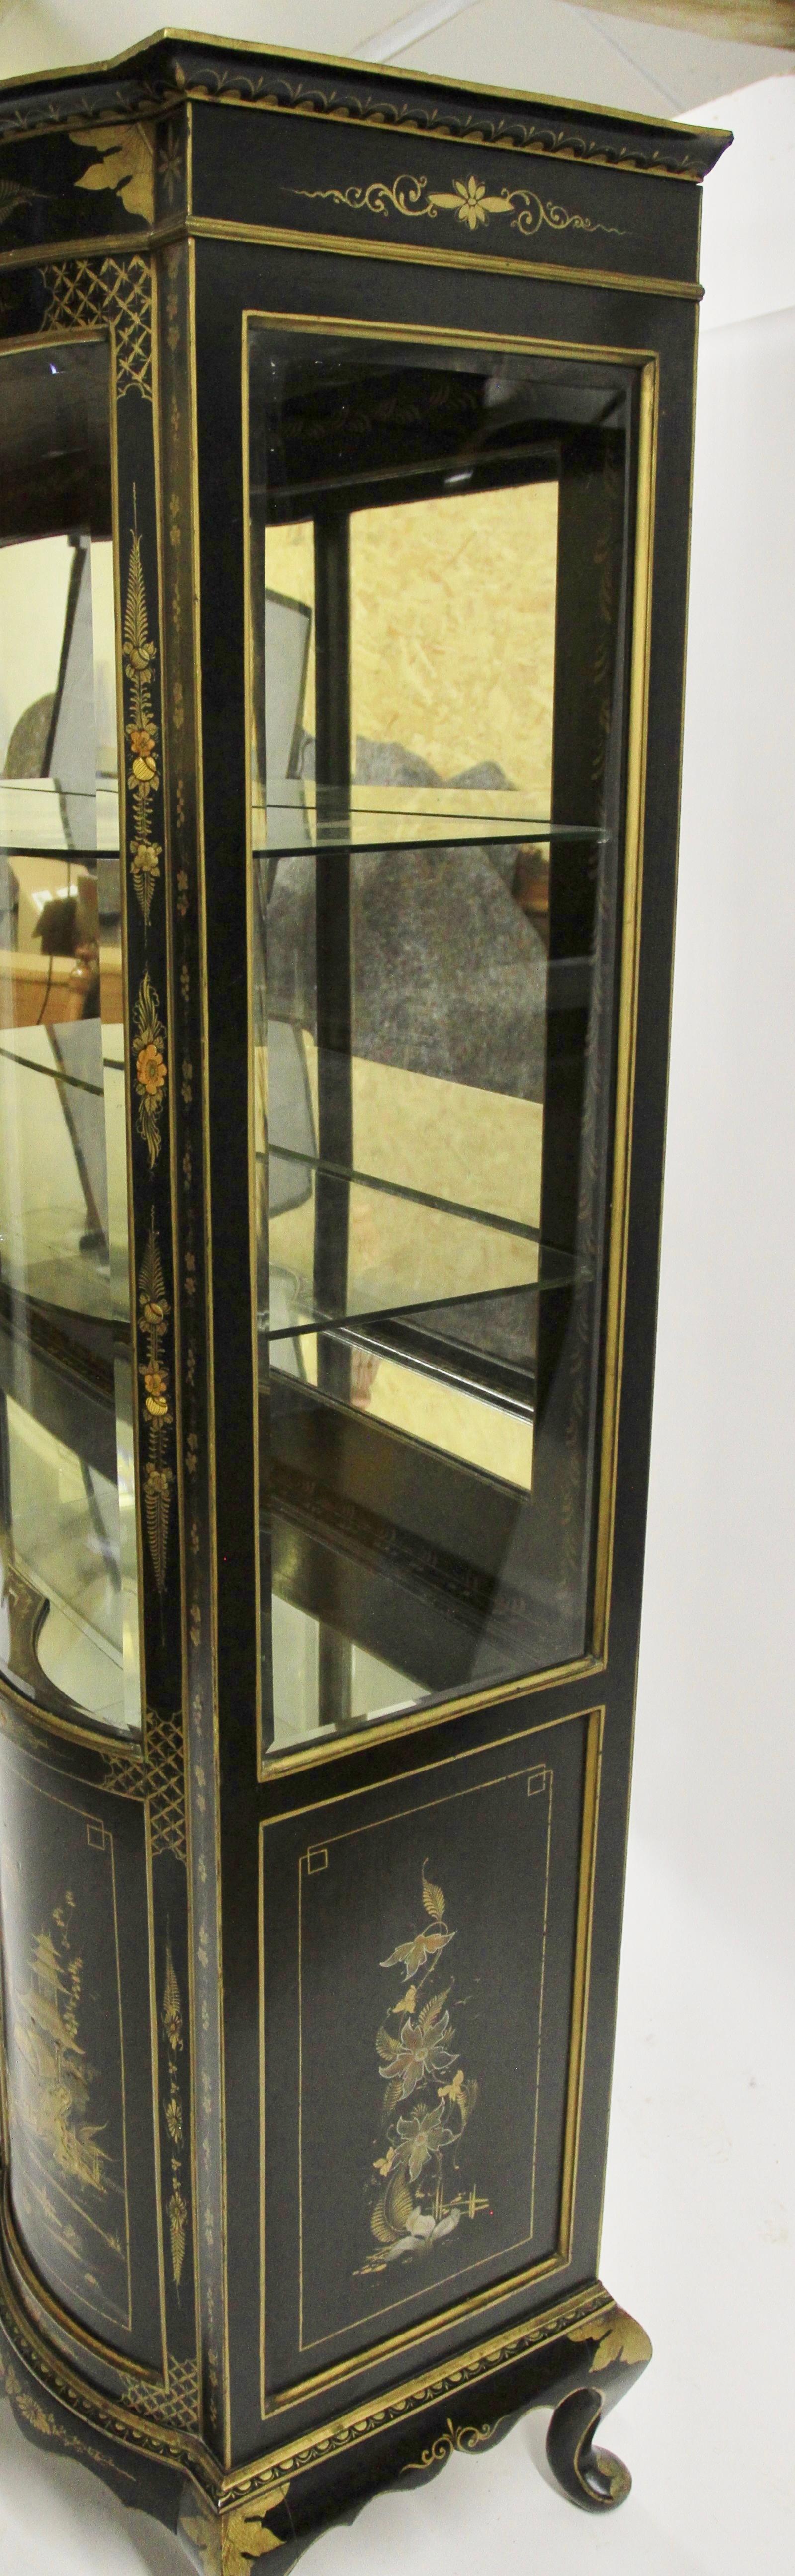 Fine Edwardian Chinoiserie Decorated Display Cabinet  en vente 3